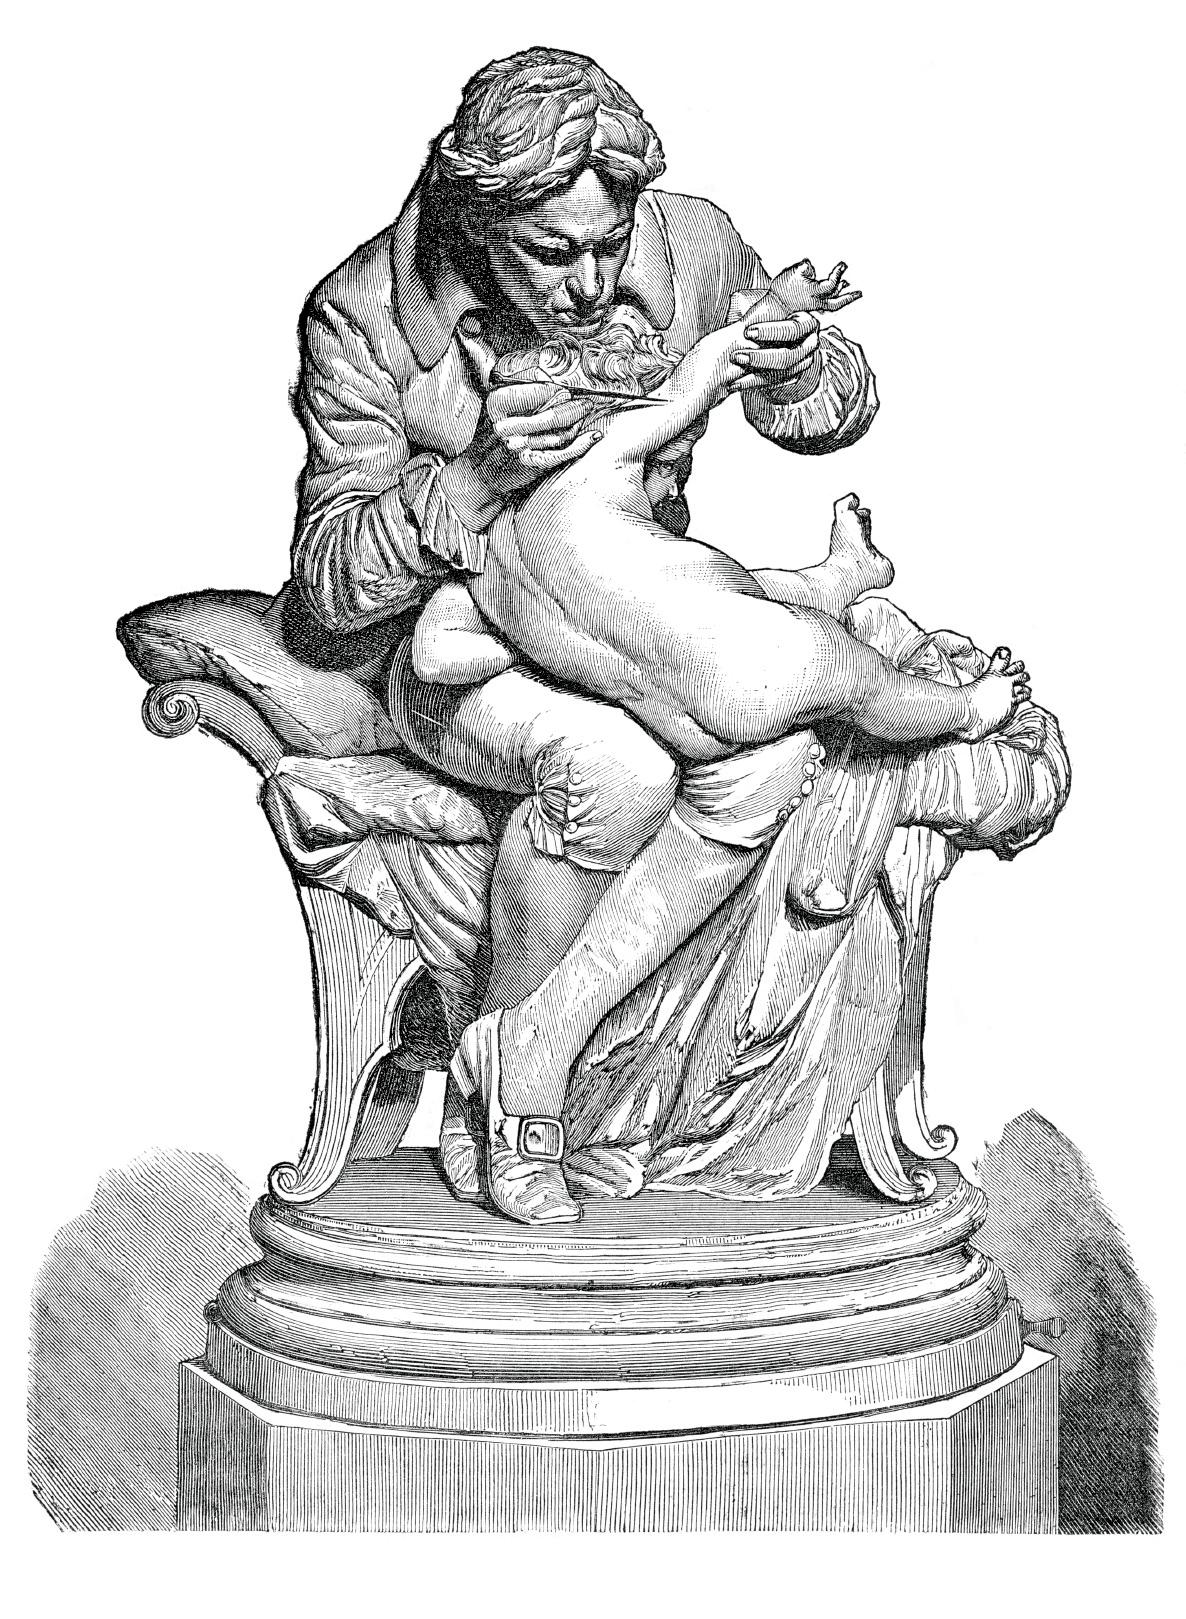 Pencil illustration of Jenner sitting on a stool, holding his naked infant son and injecting him with the vaccination